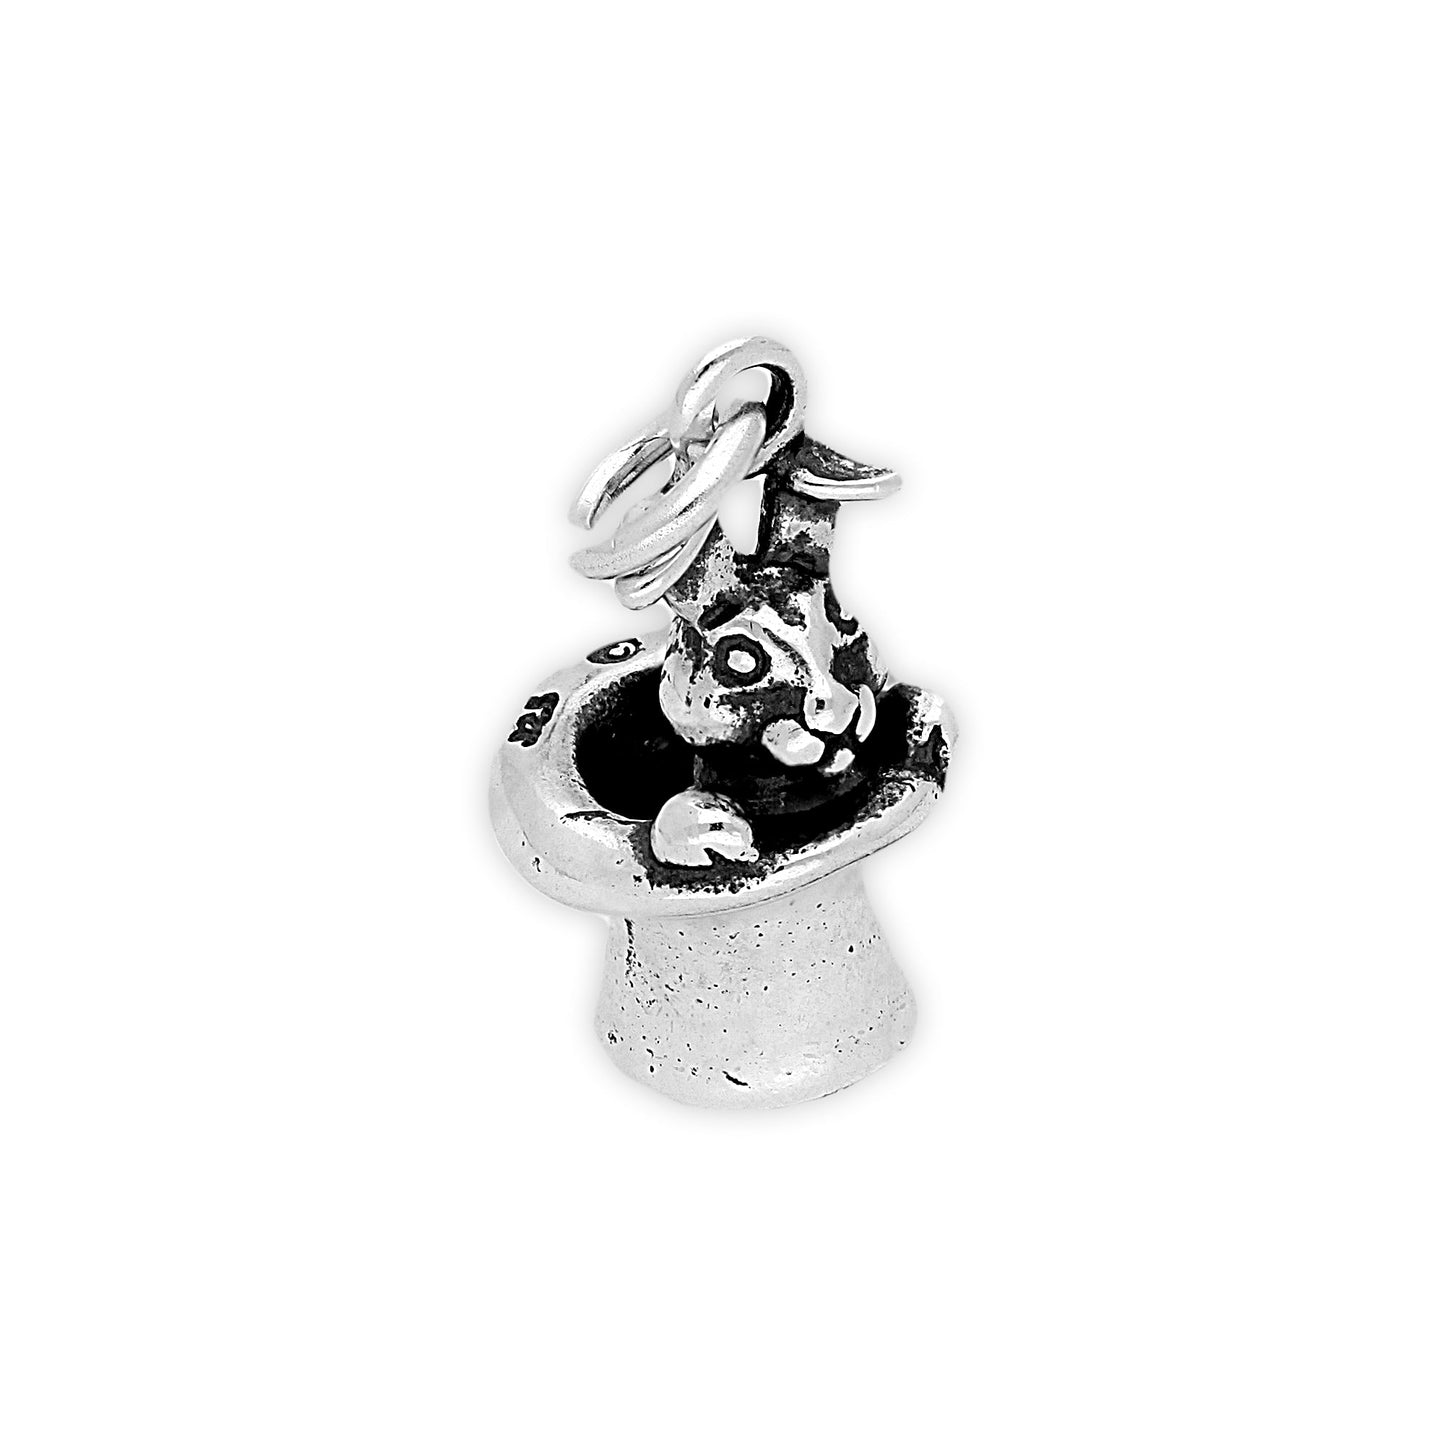 Sterling Silver Magic Rabbit in Hat Charm